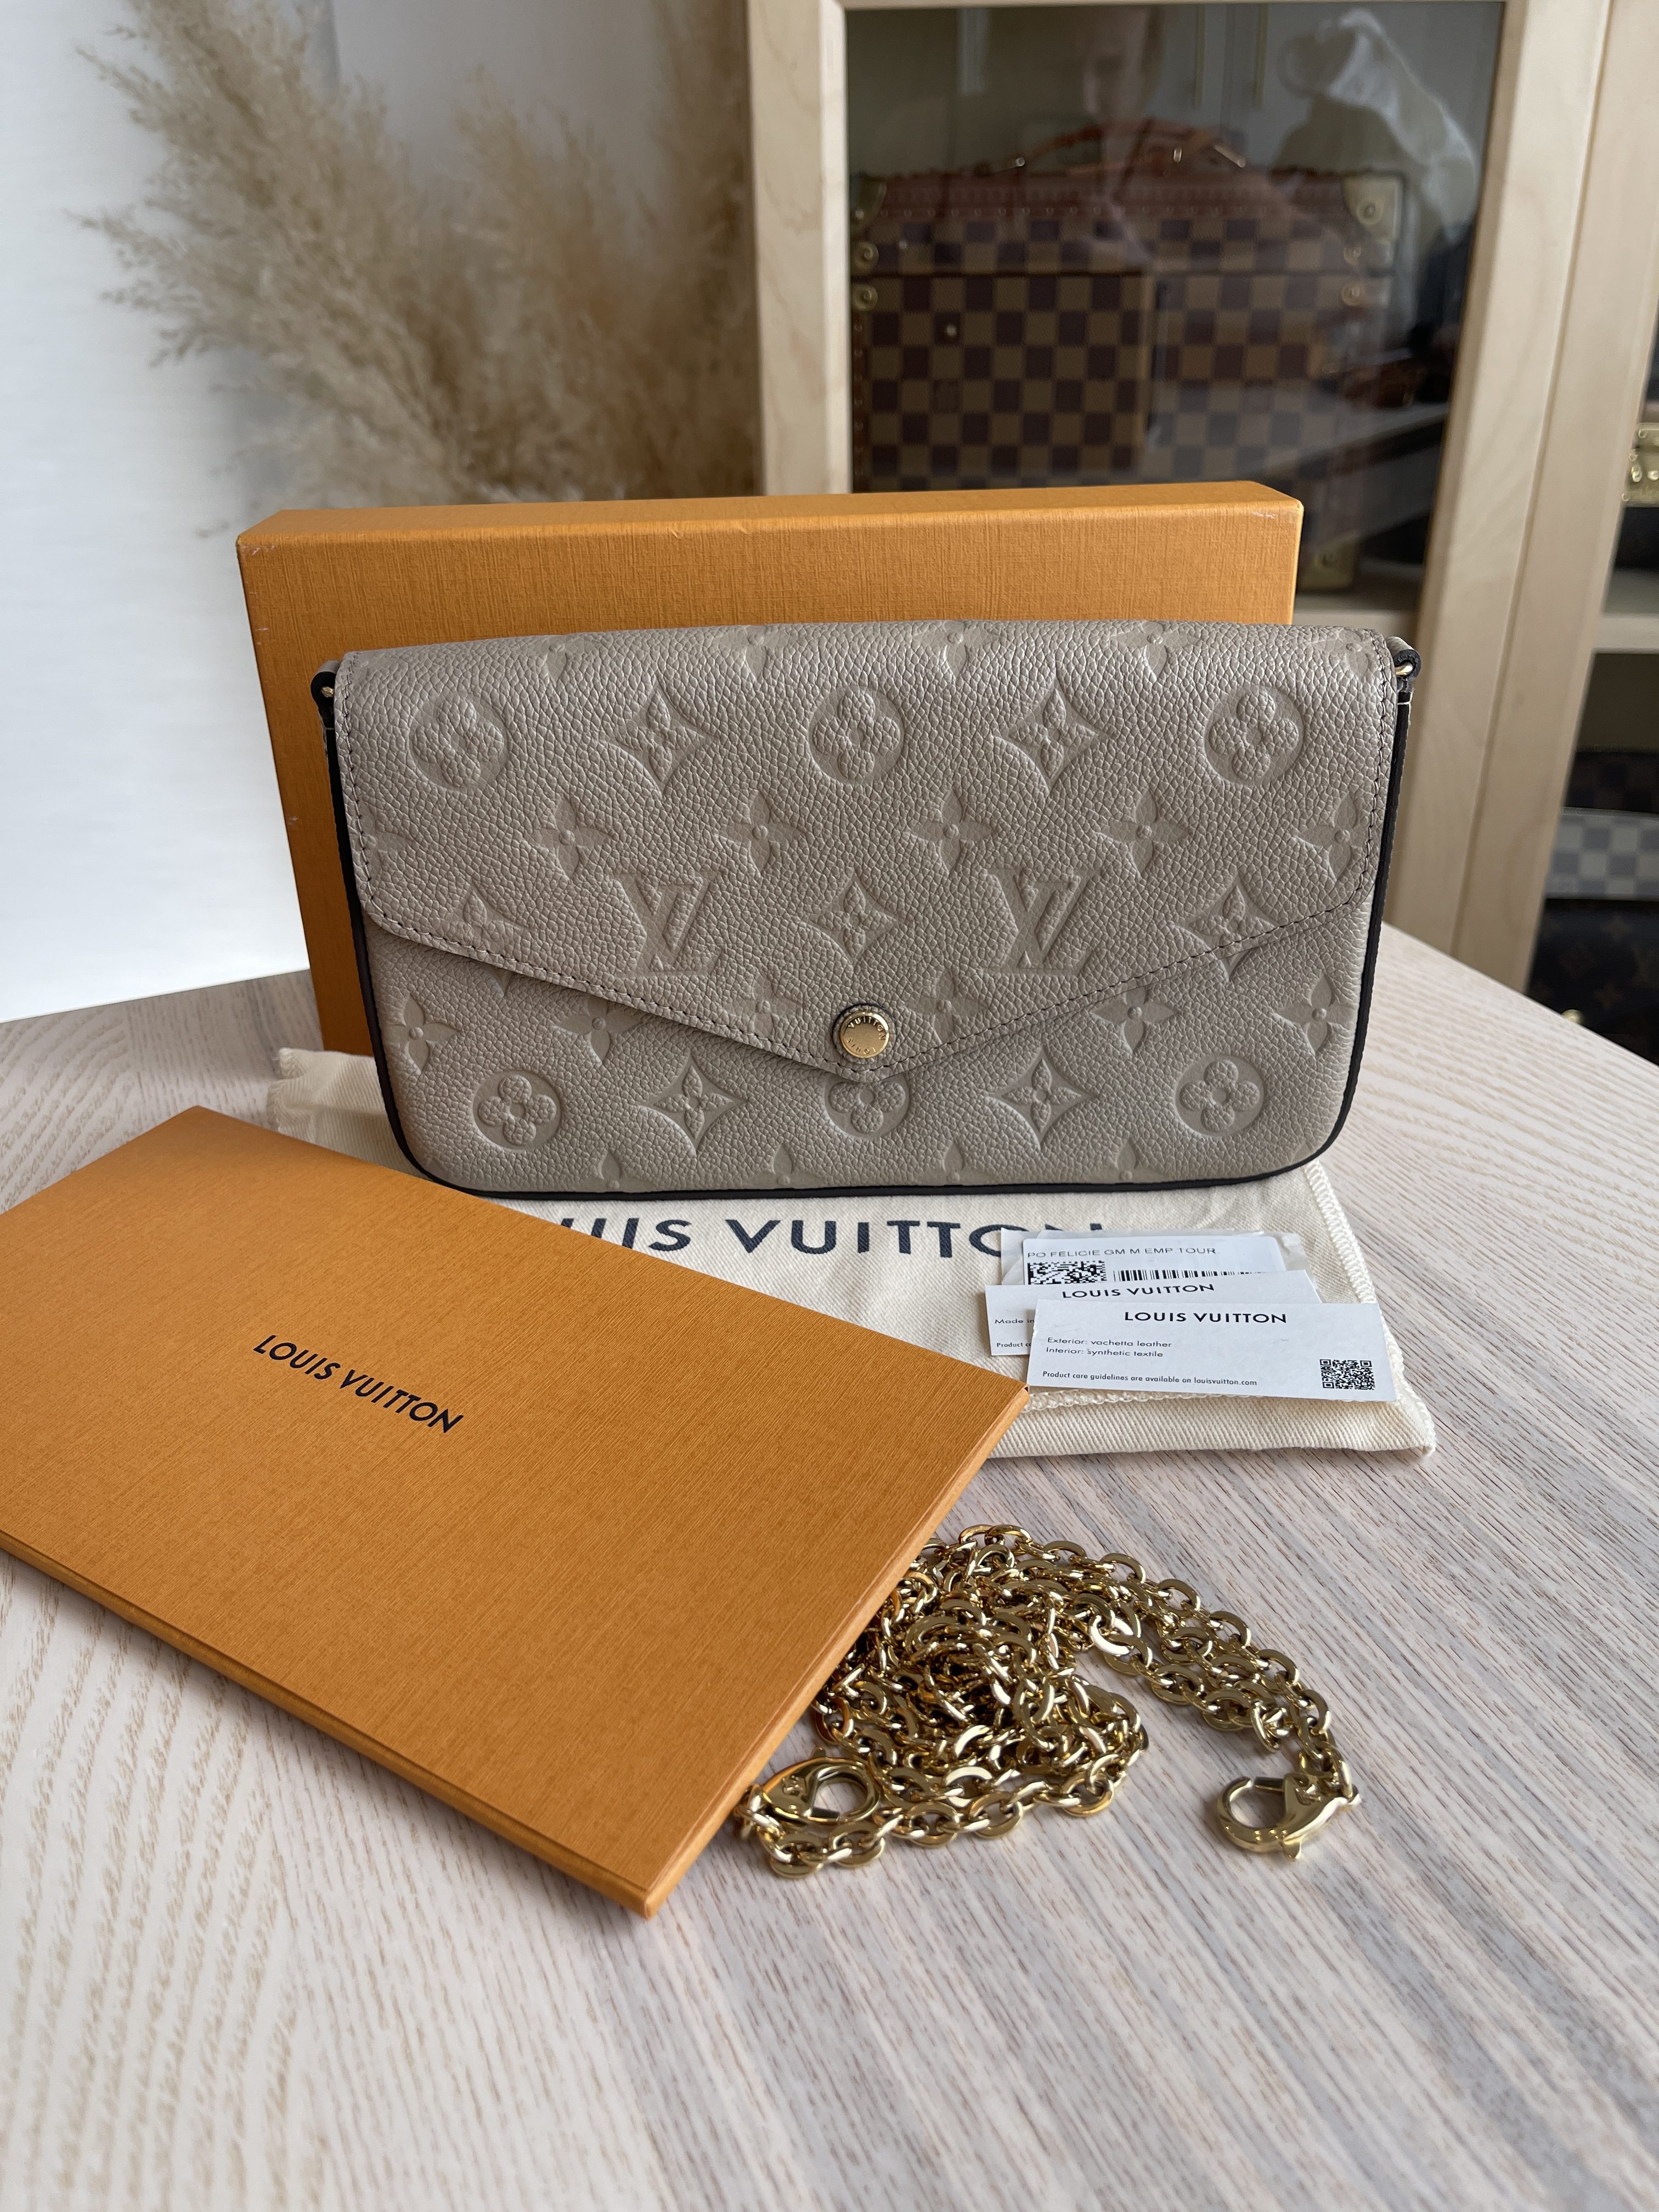 Louis Vuitton Felicie, Turtledove with Inserts, New in Dustbag - GA001